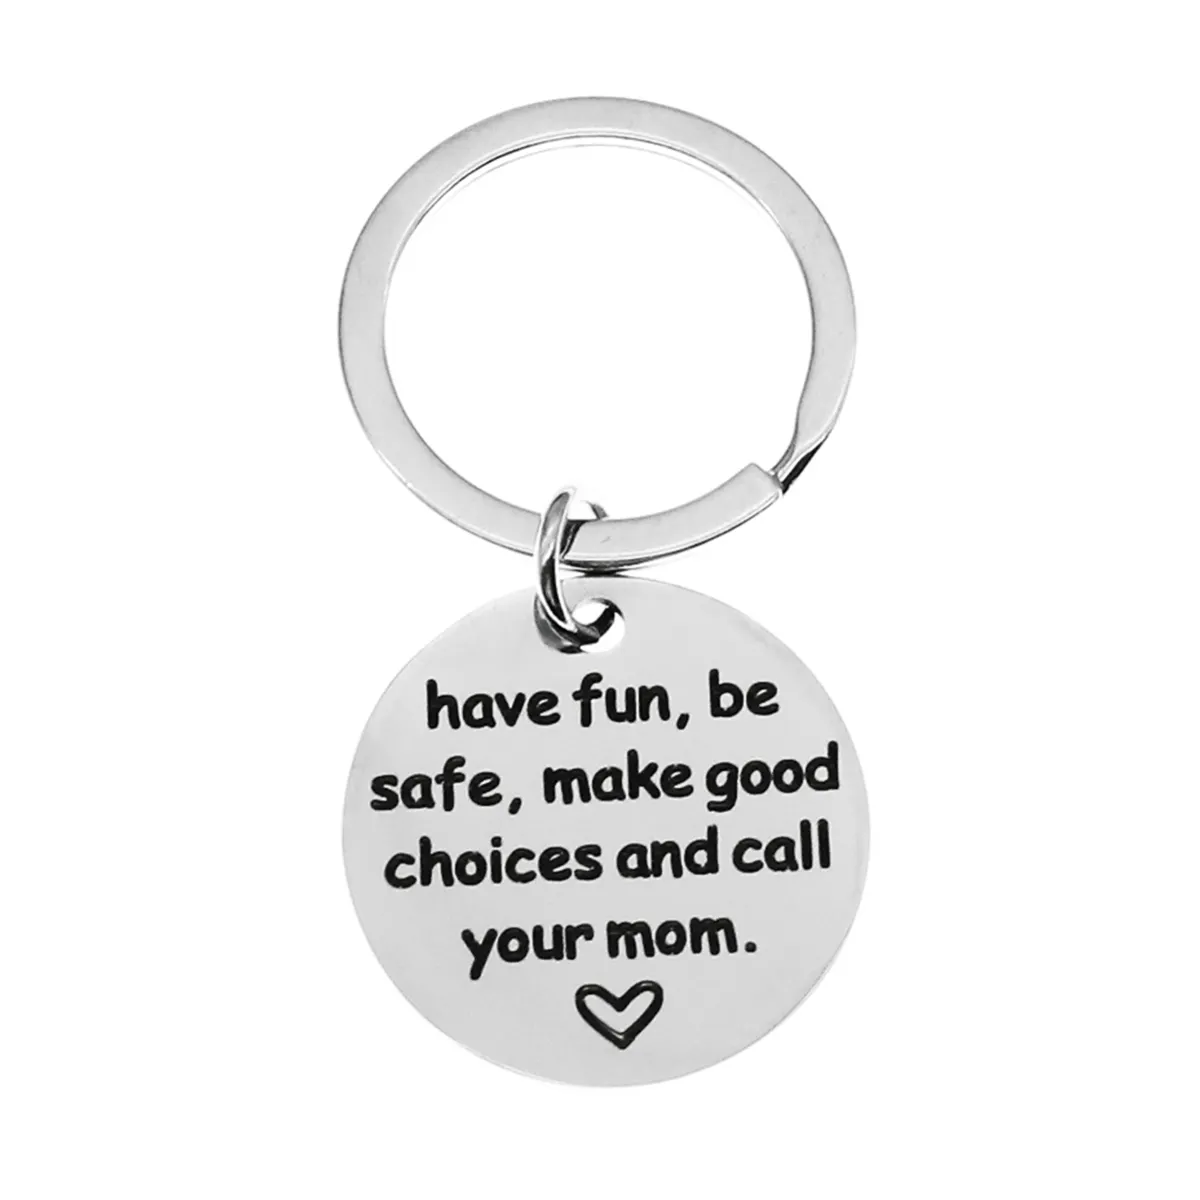 Have Fun, Be Safe, Make Good Choices and Call Your Mom Love You Stainless Steel Keychain for New Driver or Graduation Keychain